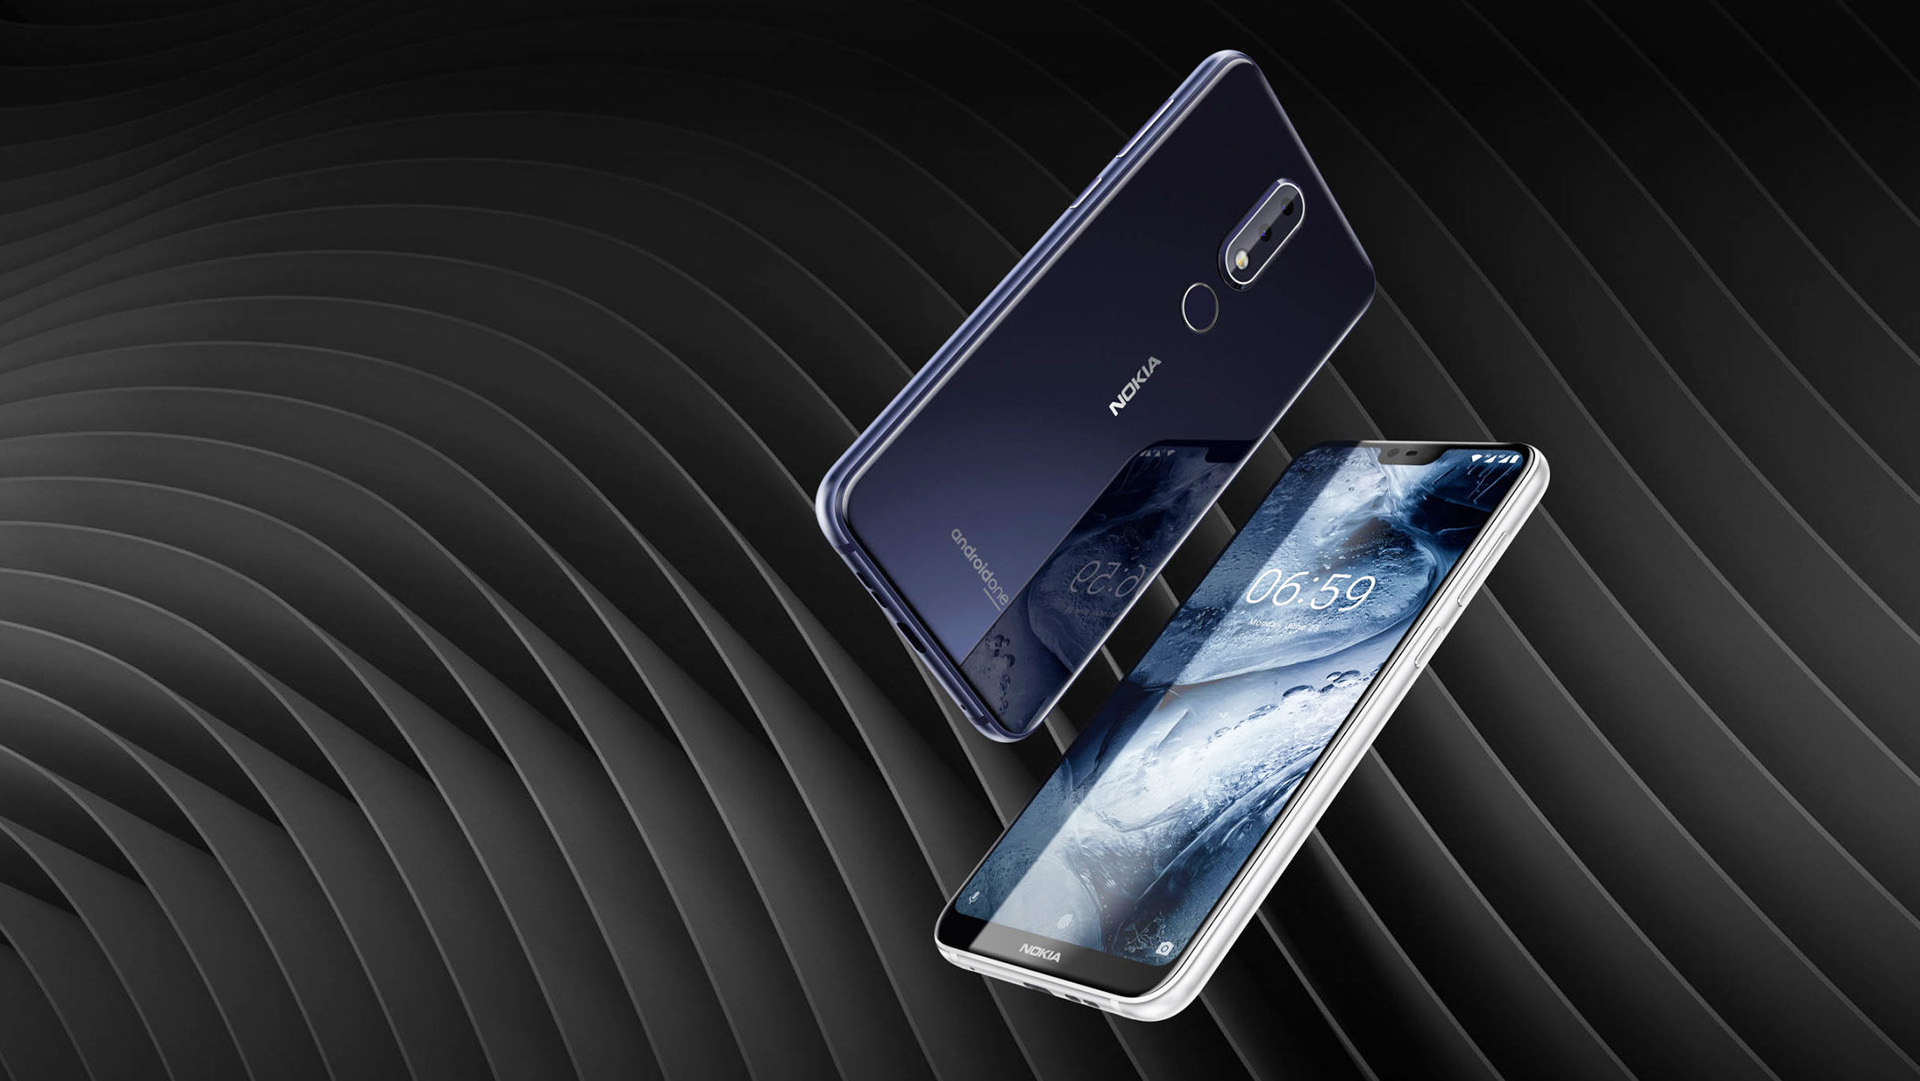 Nokia 6.1 Plus smartphone comes with Android 10